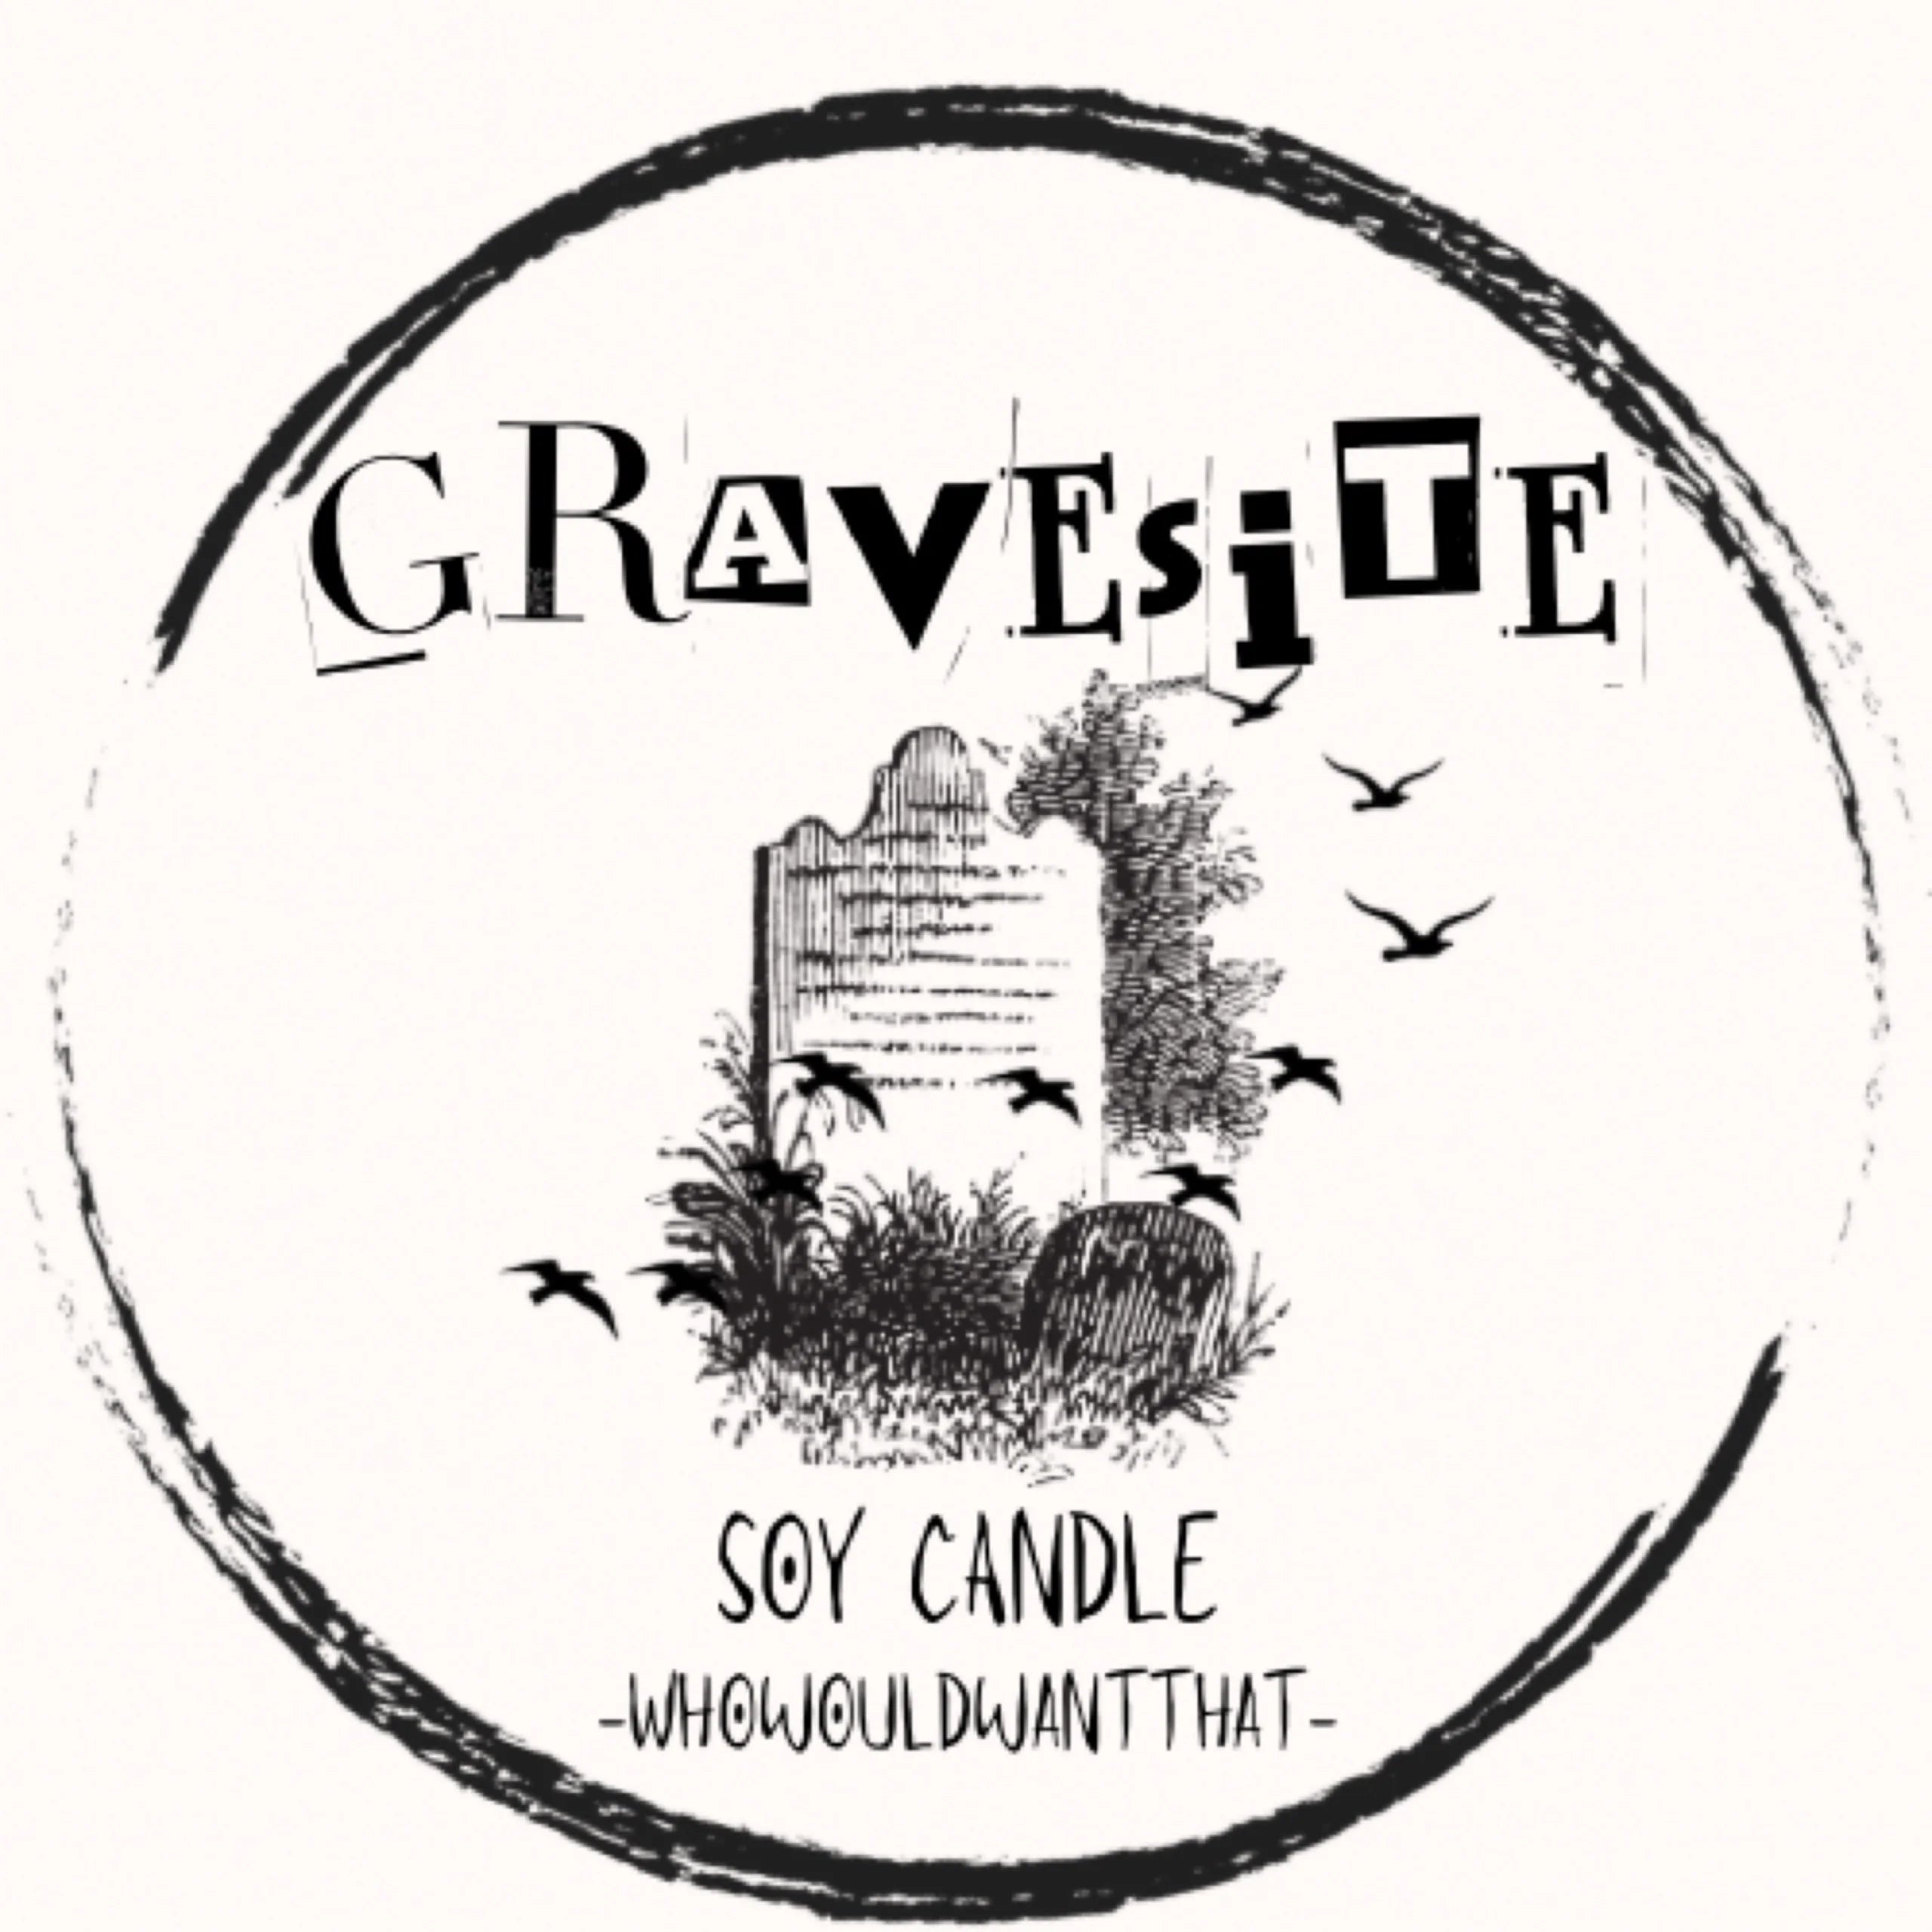 Gravesite Candle - 4 oz Scented Soy Candle - Who Would Want That